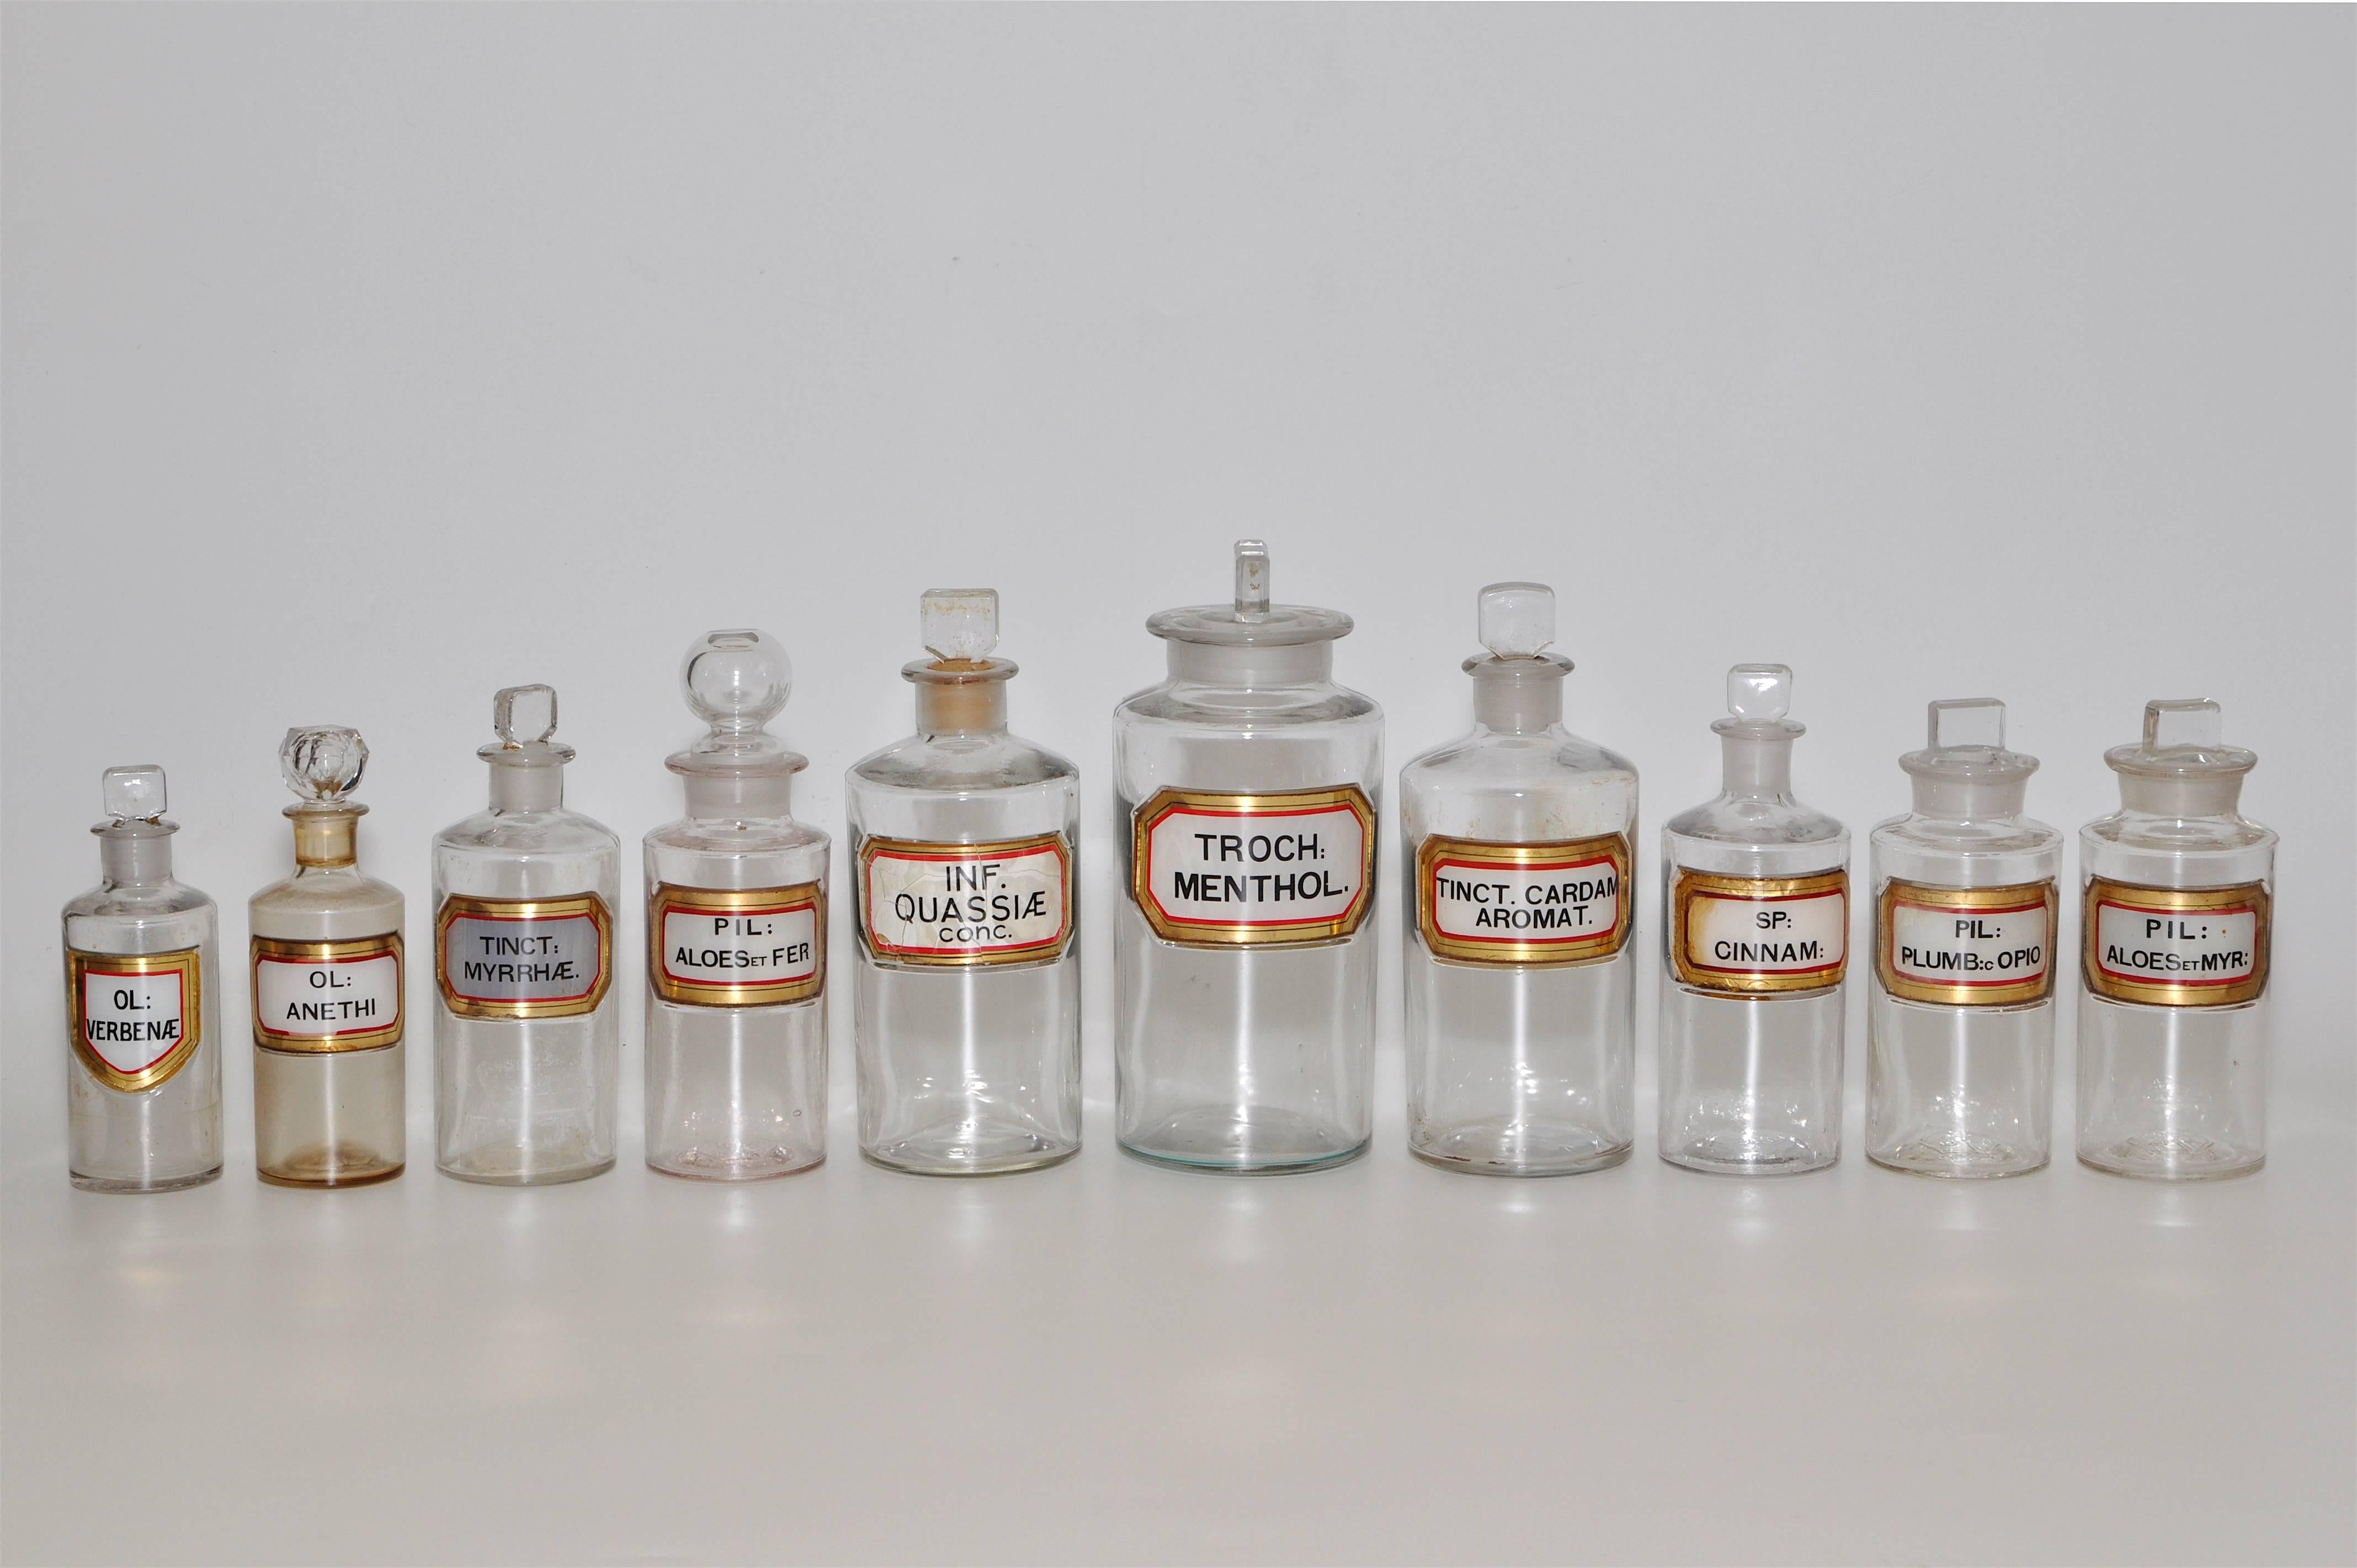 Beautiful set of ten pharmaceutical bottles circa 1900 originally from a chemists in Northern Ireland. Note the exquisite gold leaf framed labels which make them real collectors items (and add value). These elegant bottles lined pharmacy shelves